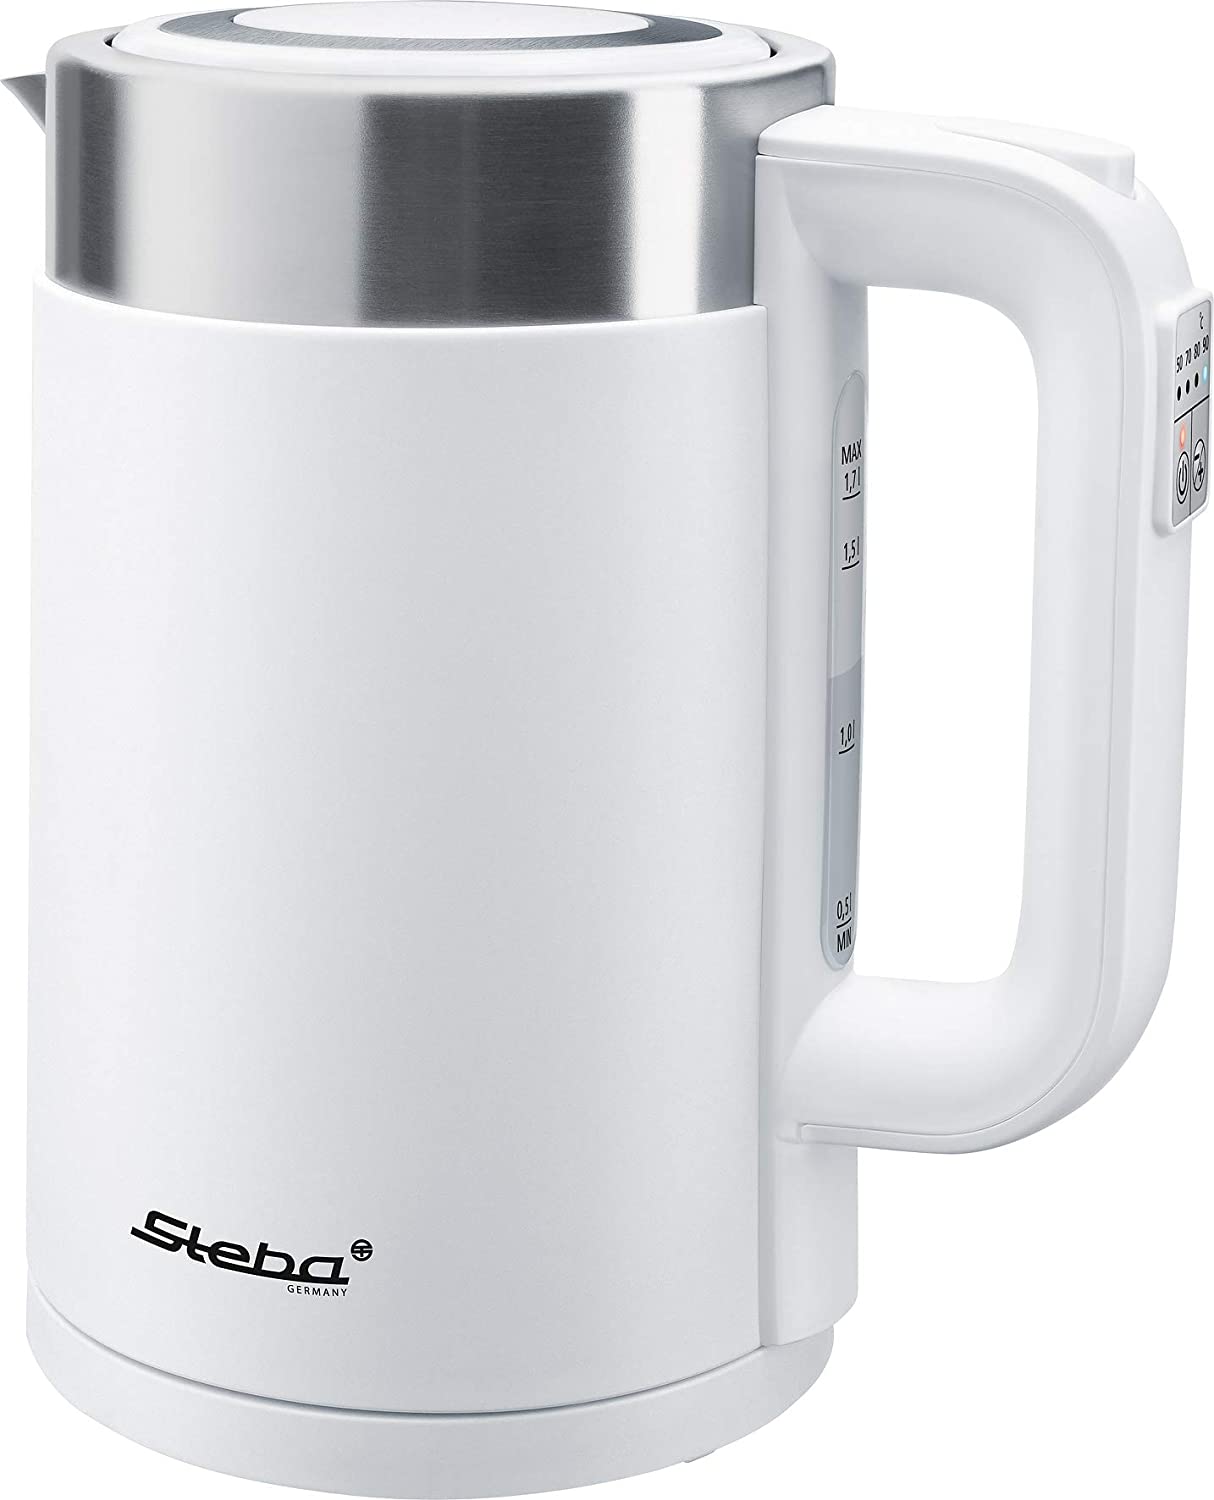 Steba Kettle WK 11 Bianco | Temperature Adjustable: 50, 70, 80, 90, 100 °C | Double-walled housing (stainless steel, outer plastic) with thermal function | 1.7 litre capacity